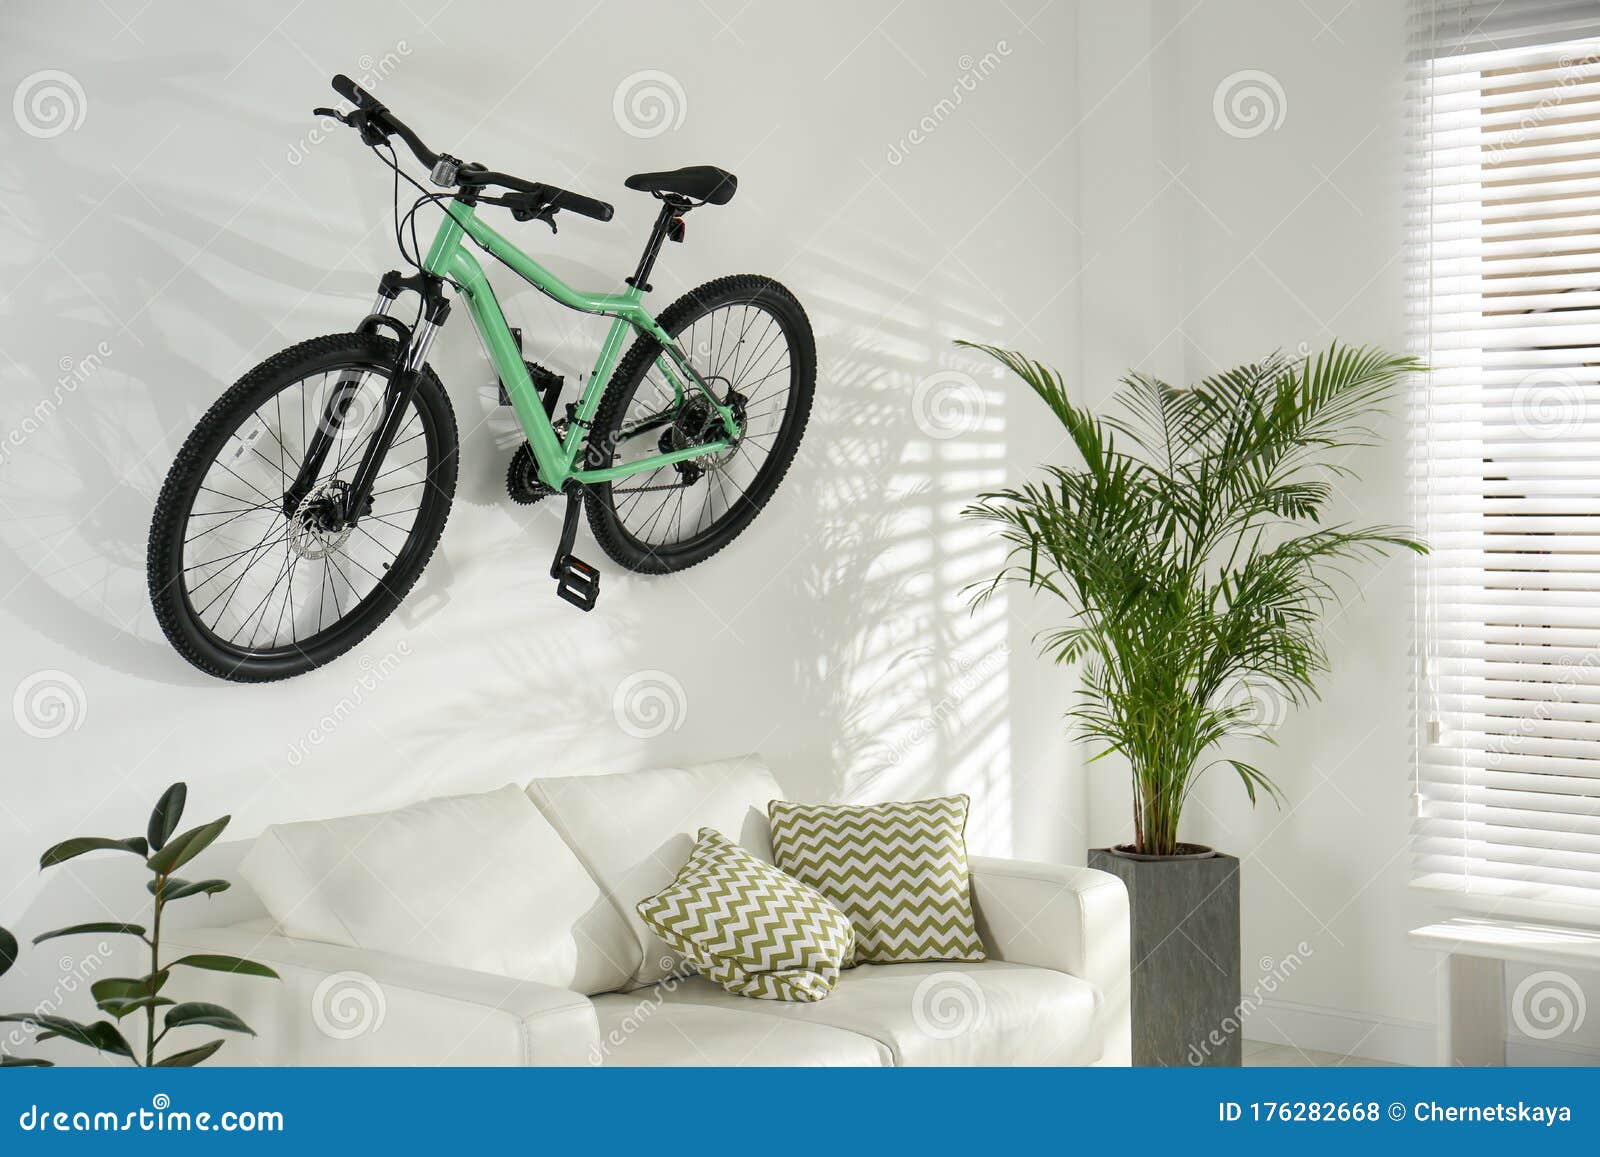 Stylish Living Room Interior With White Sofa And Bicycle ...